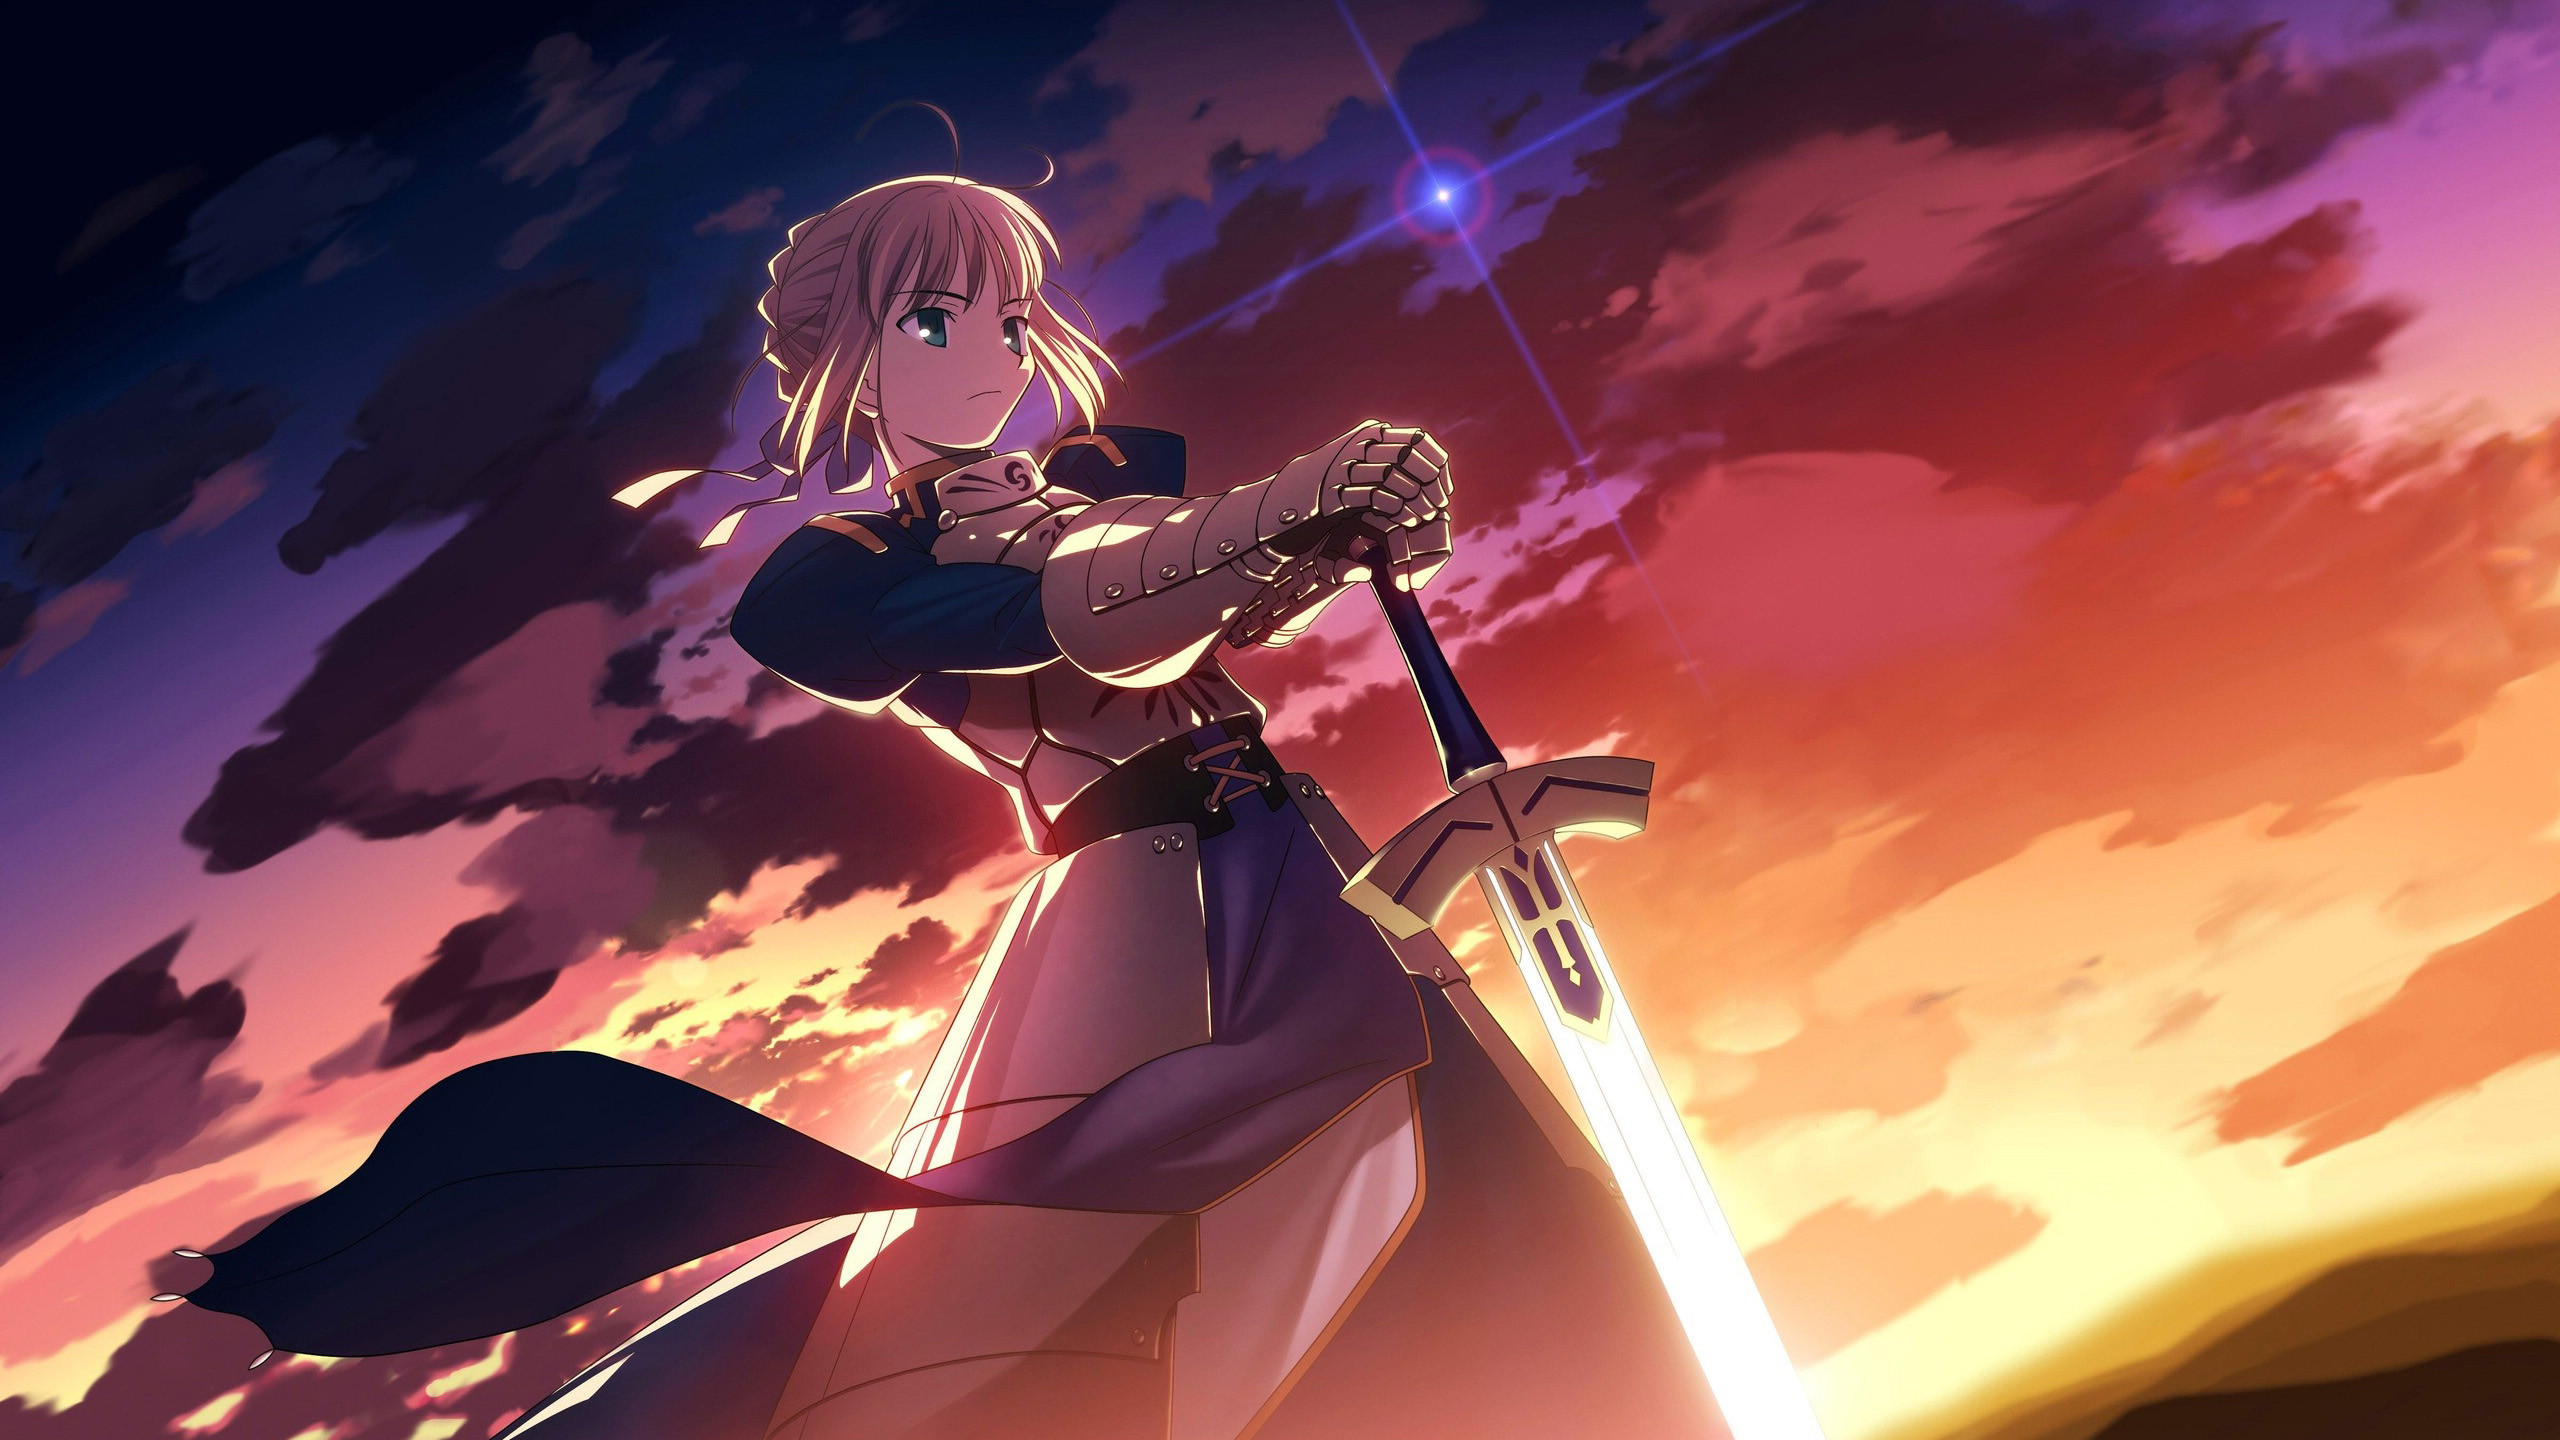 Saber, Fate / stay night, white dress, anime girl wallpaper Fate / stay night Unlimited Blade Works, Anime Wallpapers Pinterest Fate stay night and Anime